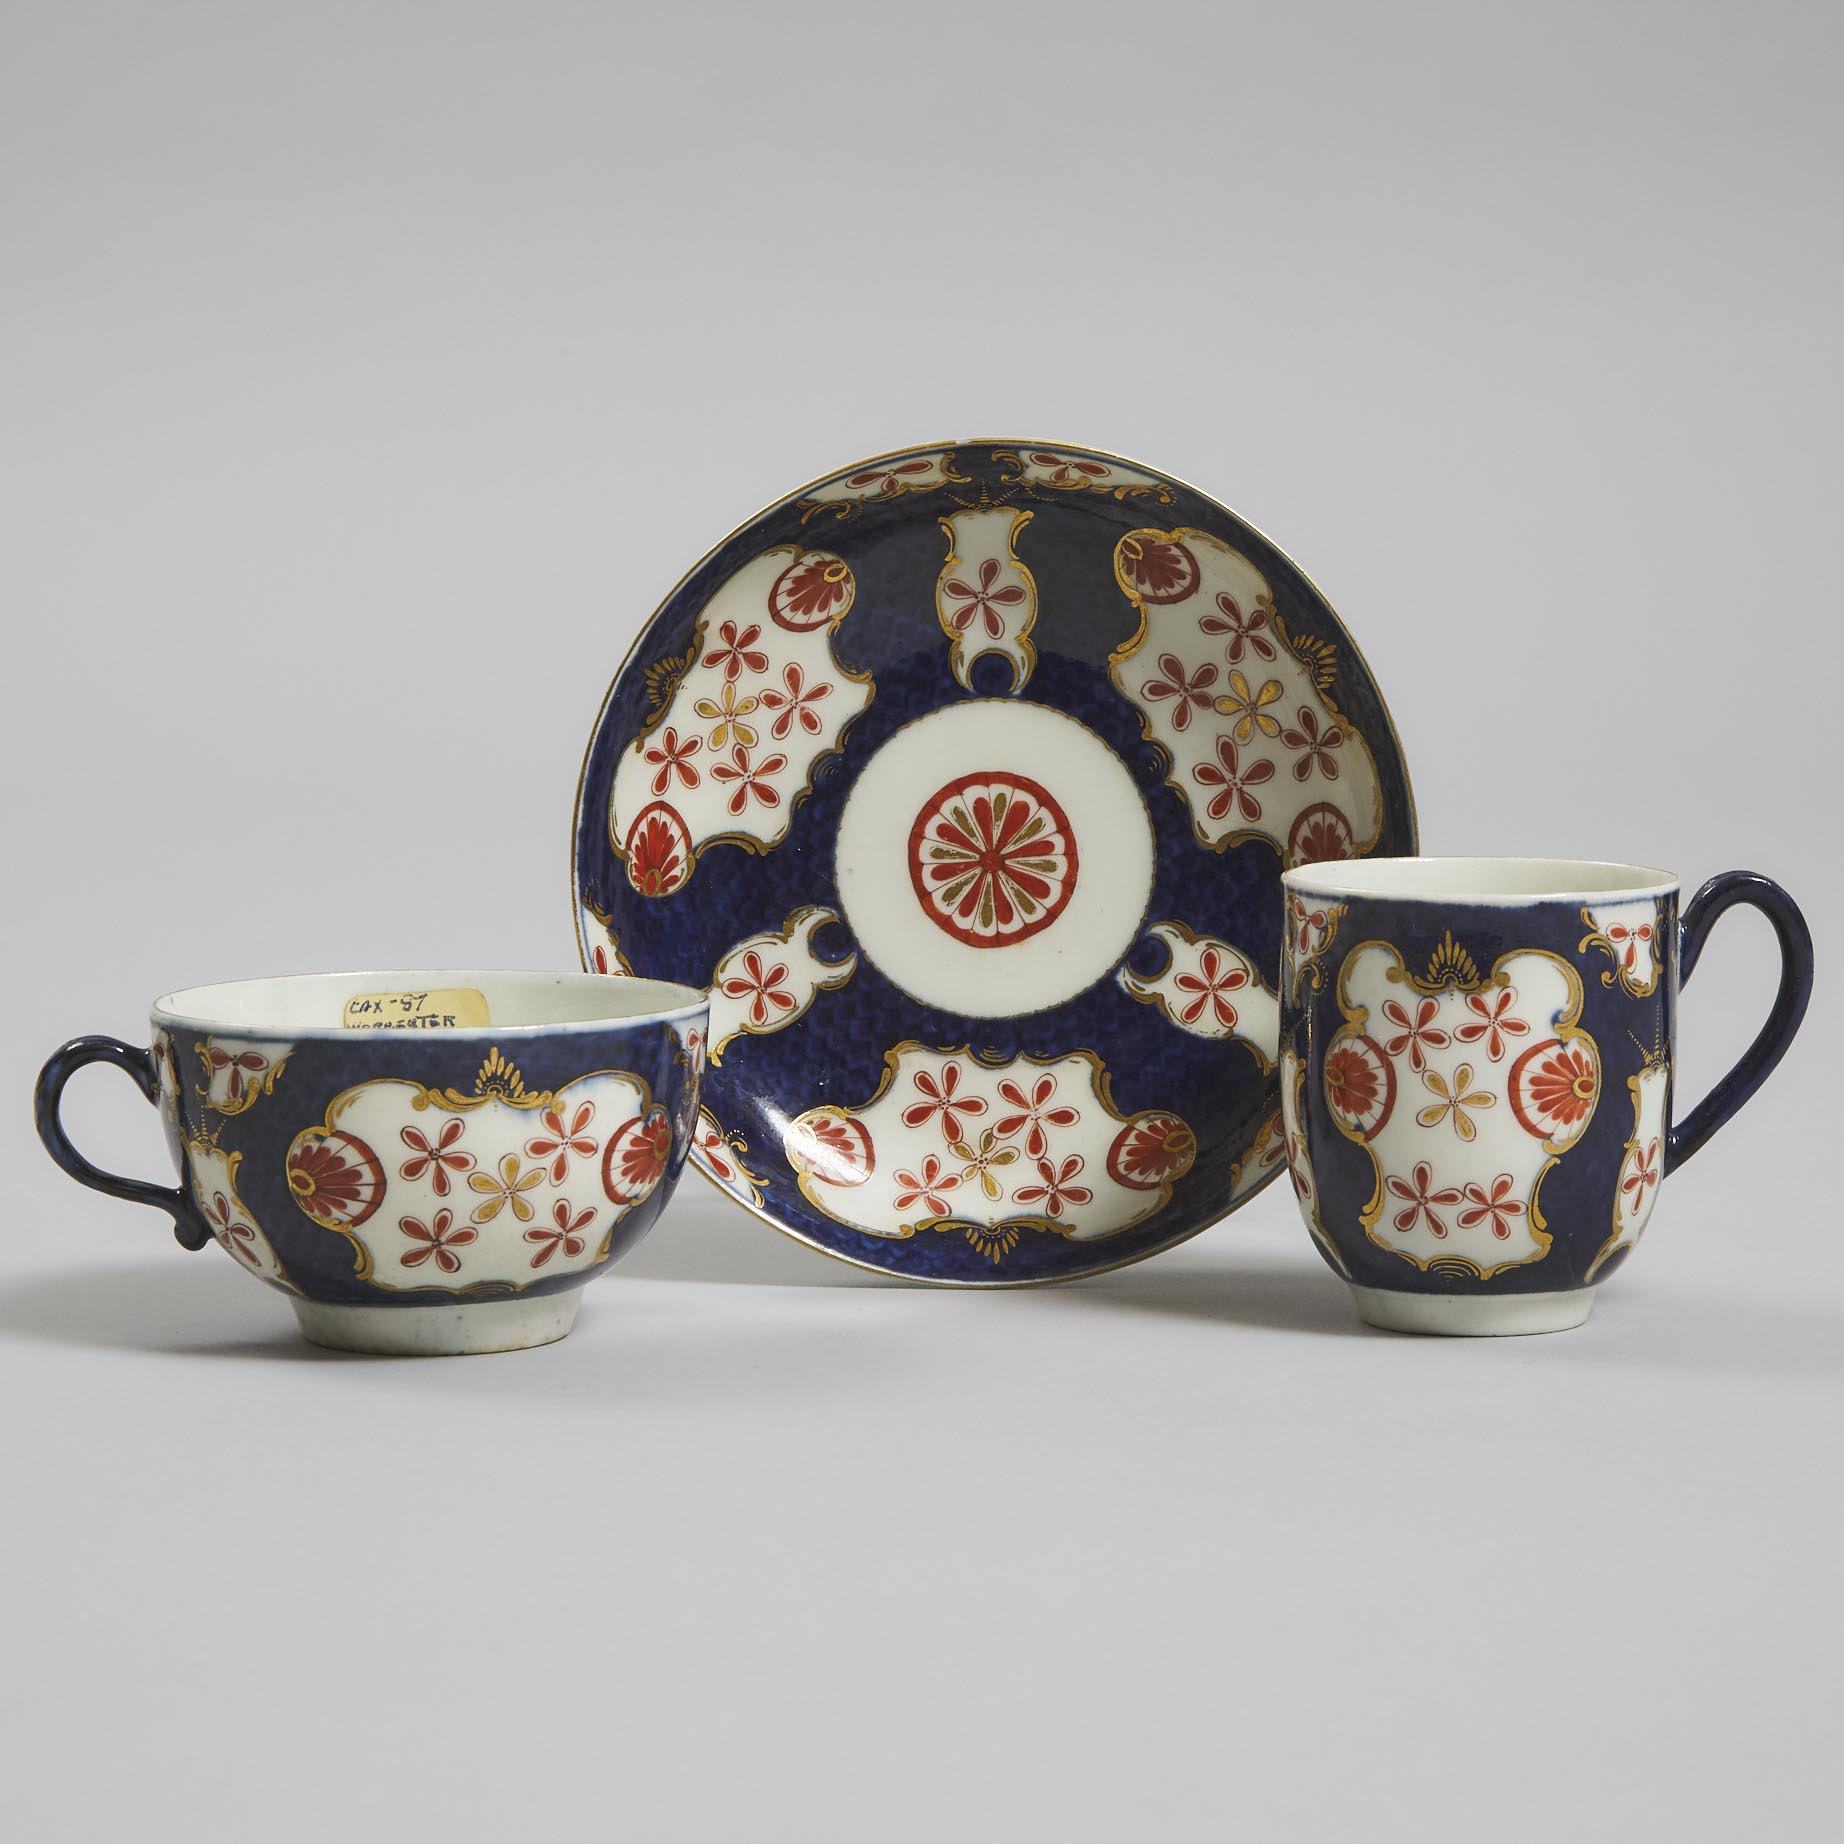 Worcester 'Old Japan Star' Pattern Tea Cup, Coffee Cup and Saucer Trio, c.1770